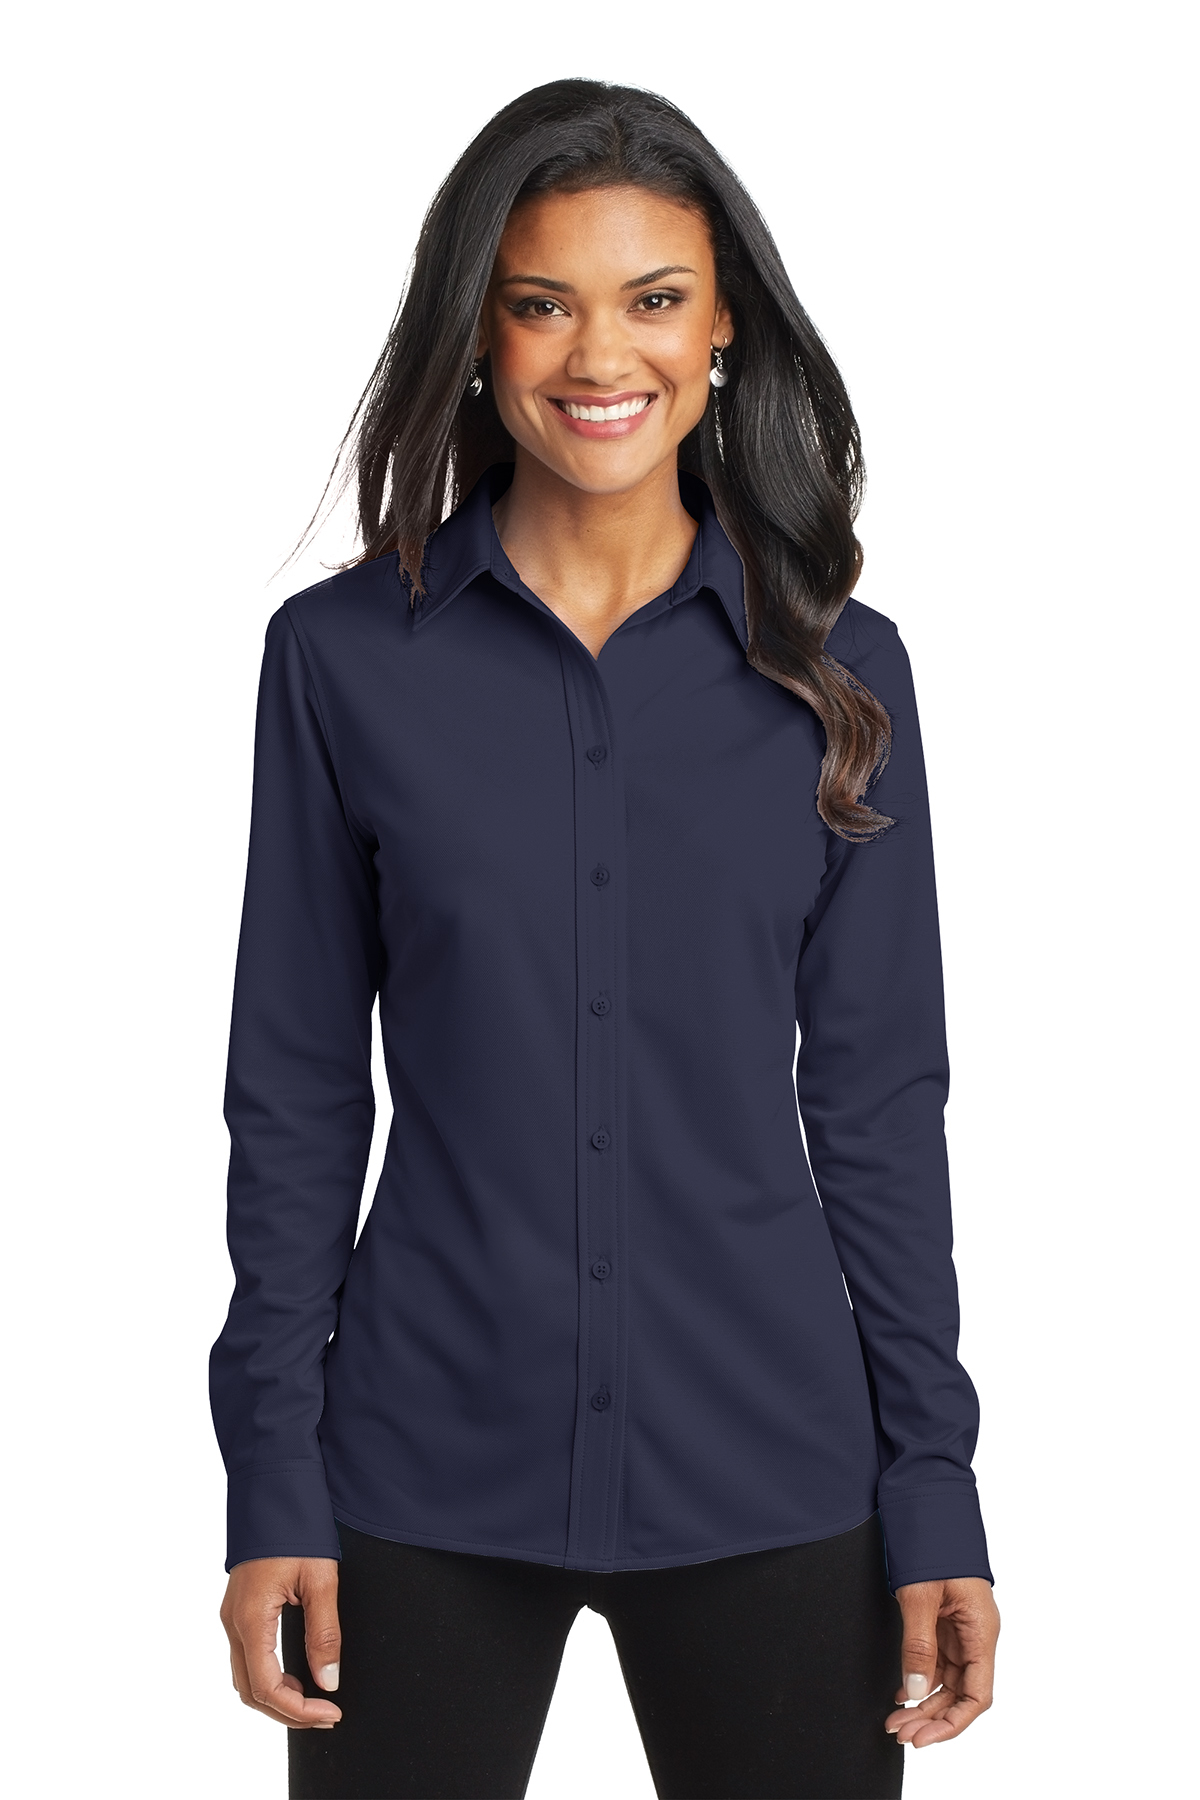 Port Authority Ladies Dimension Knit Dress Shirt | Product | Company ...